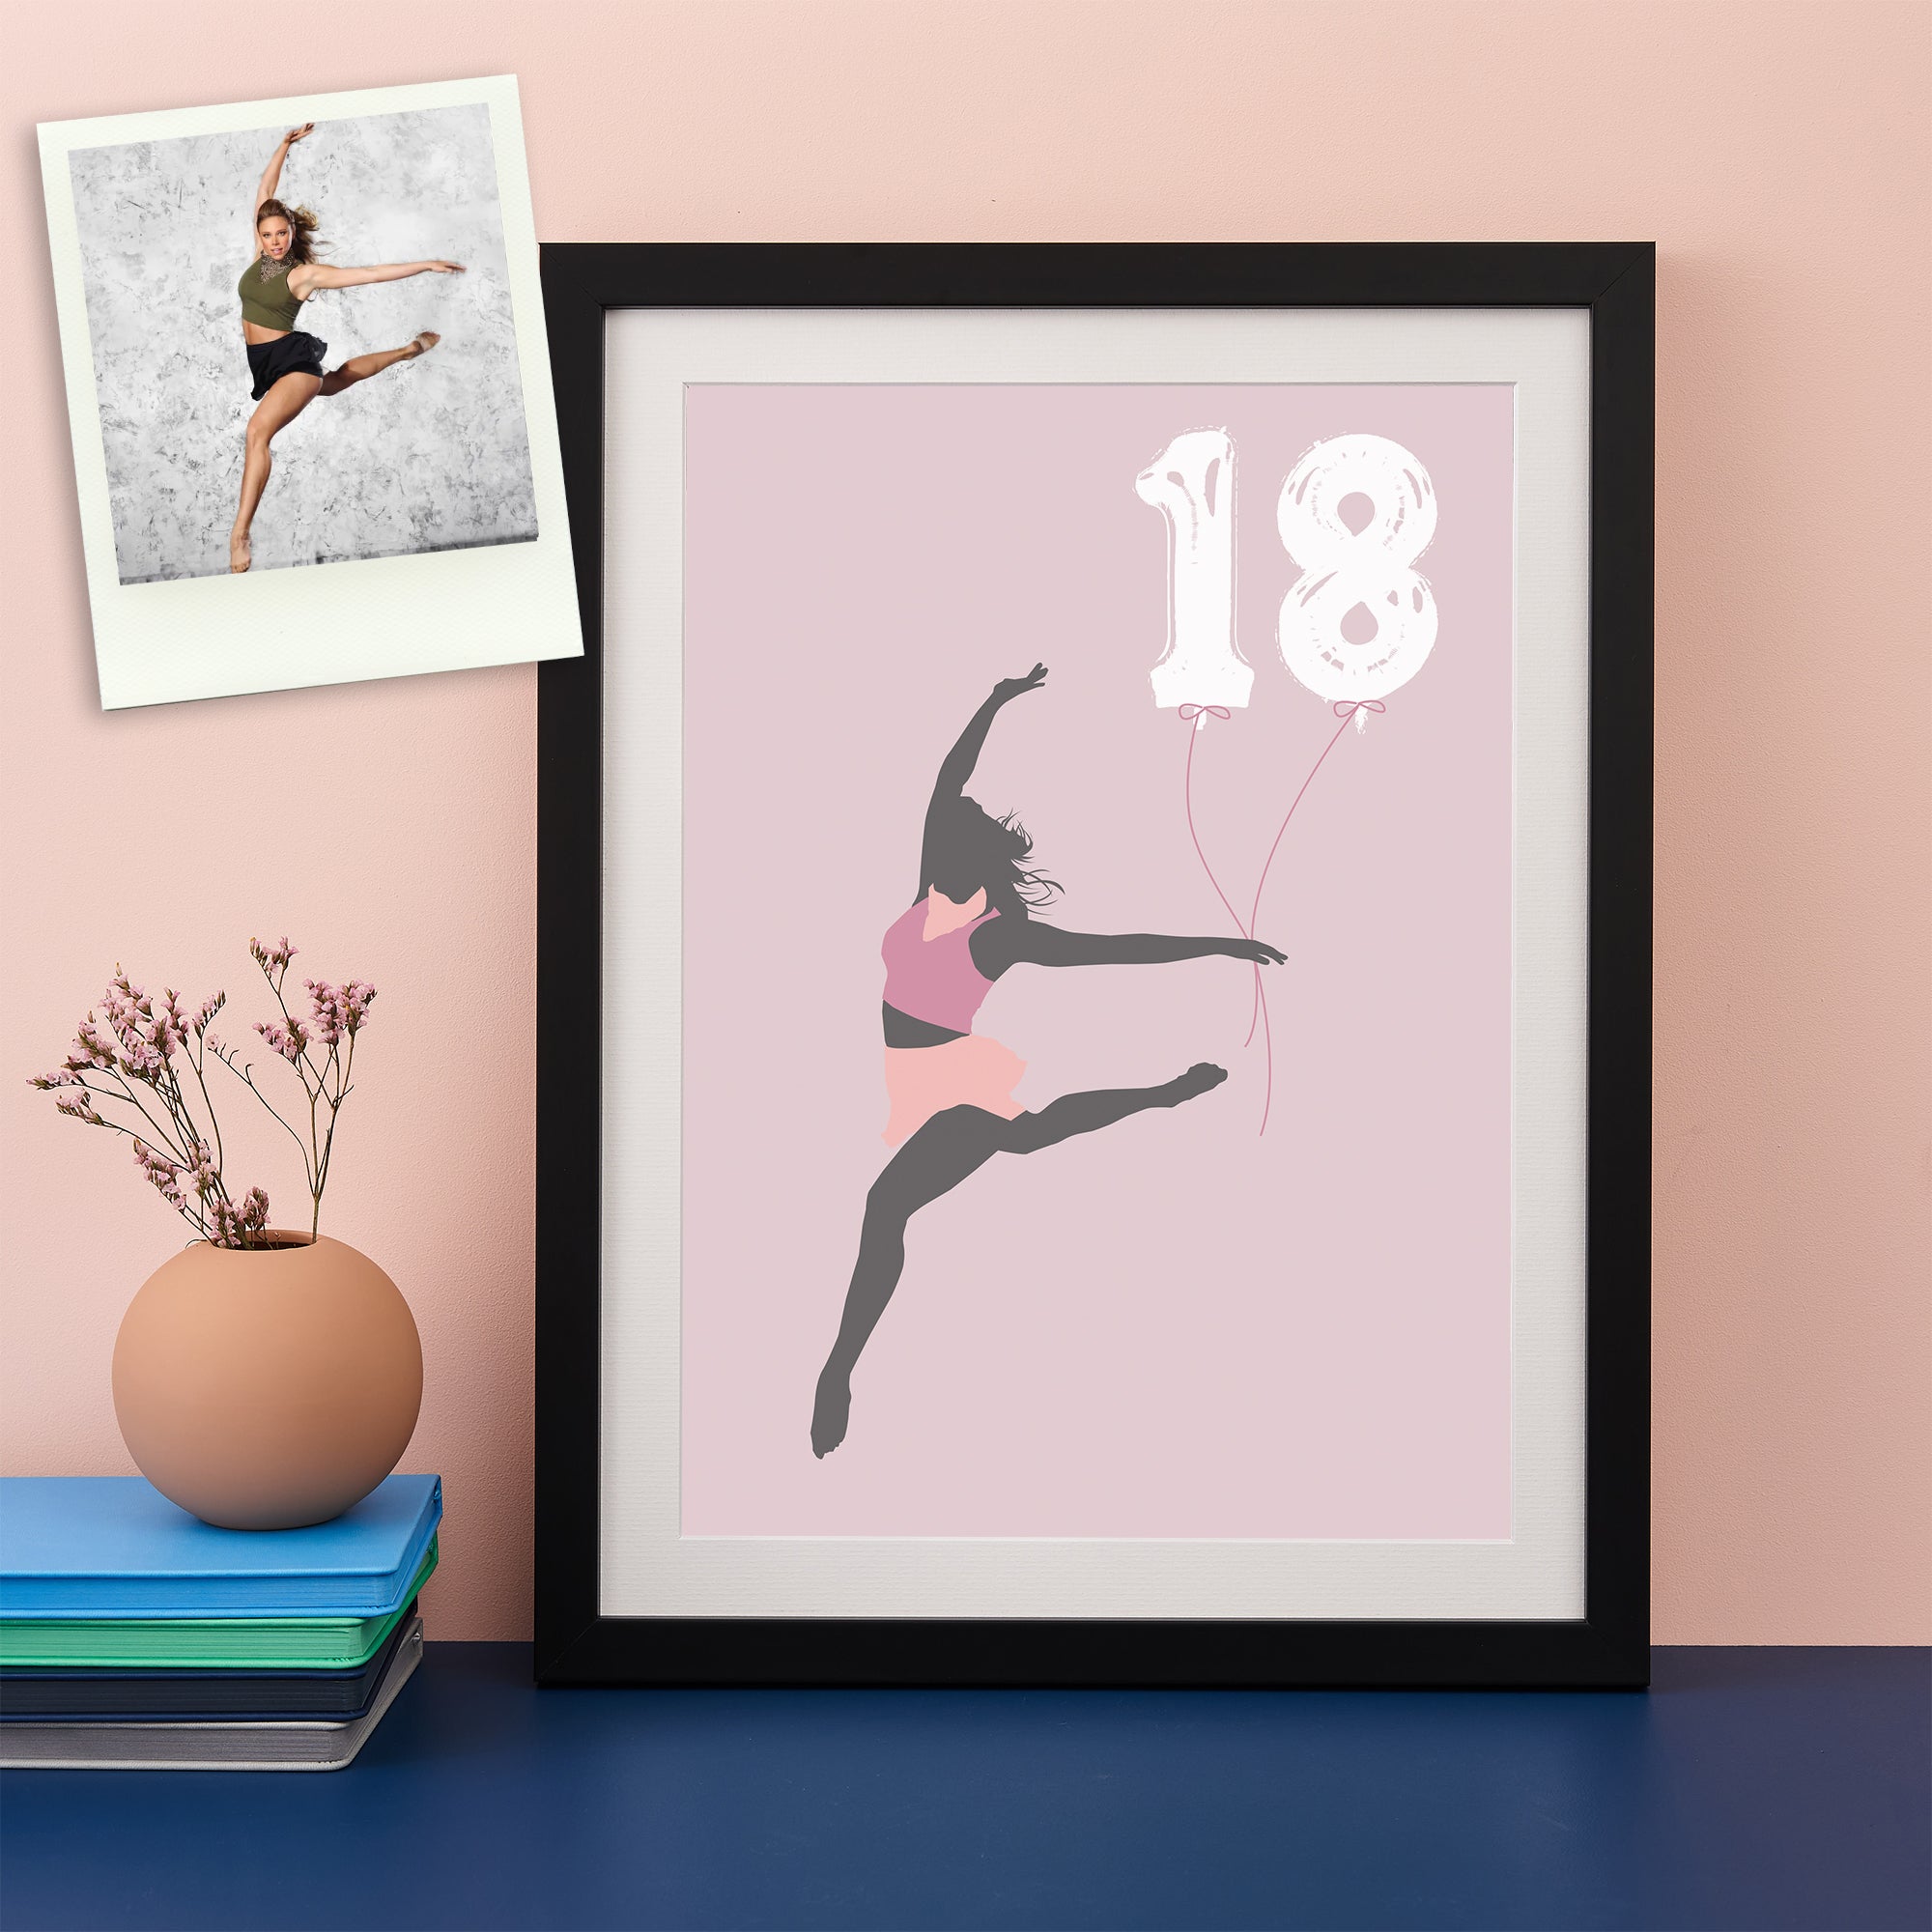 Pinks and grey silhouette of a ballet dancer holding number 18 balloons with the original photograph shown